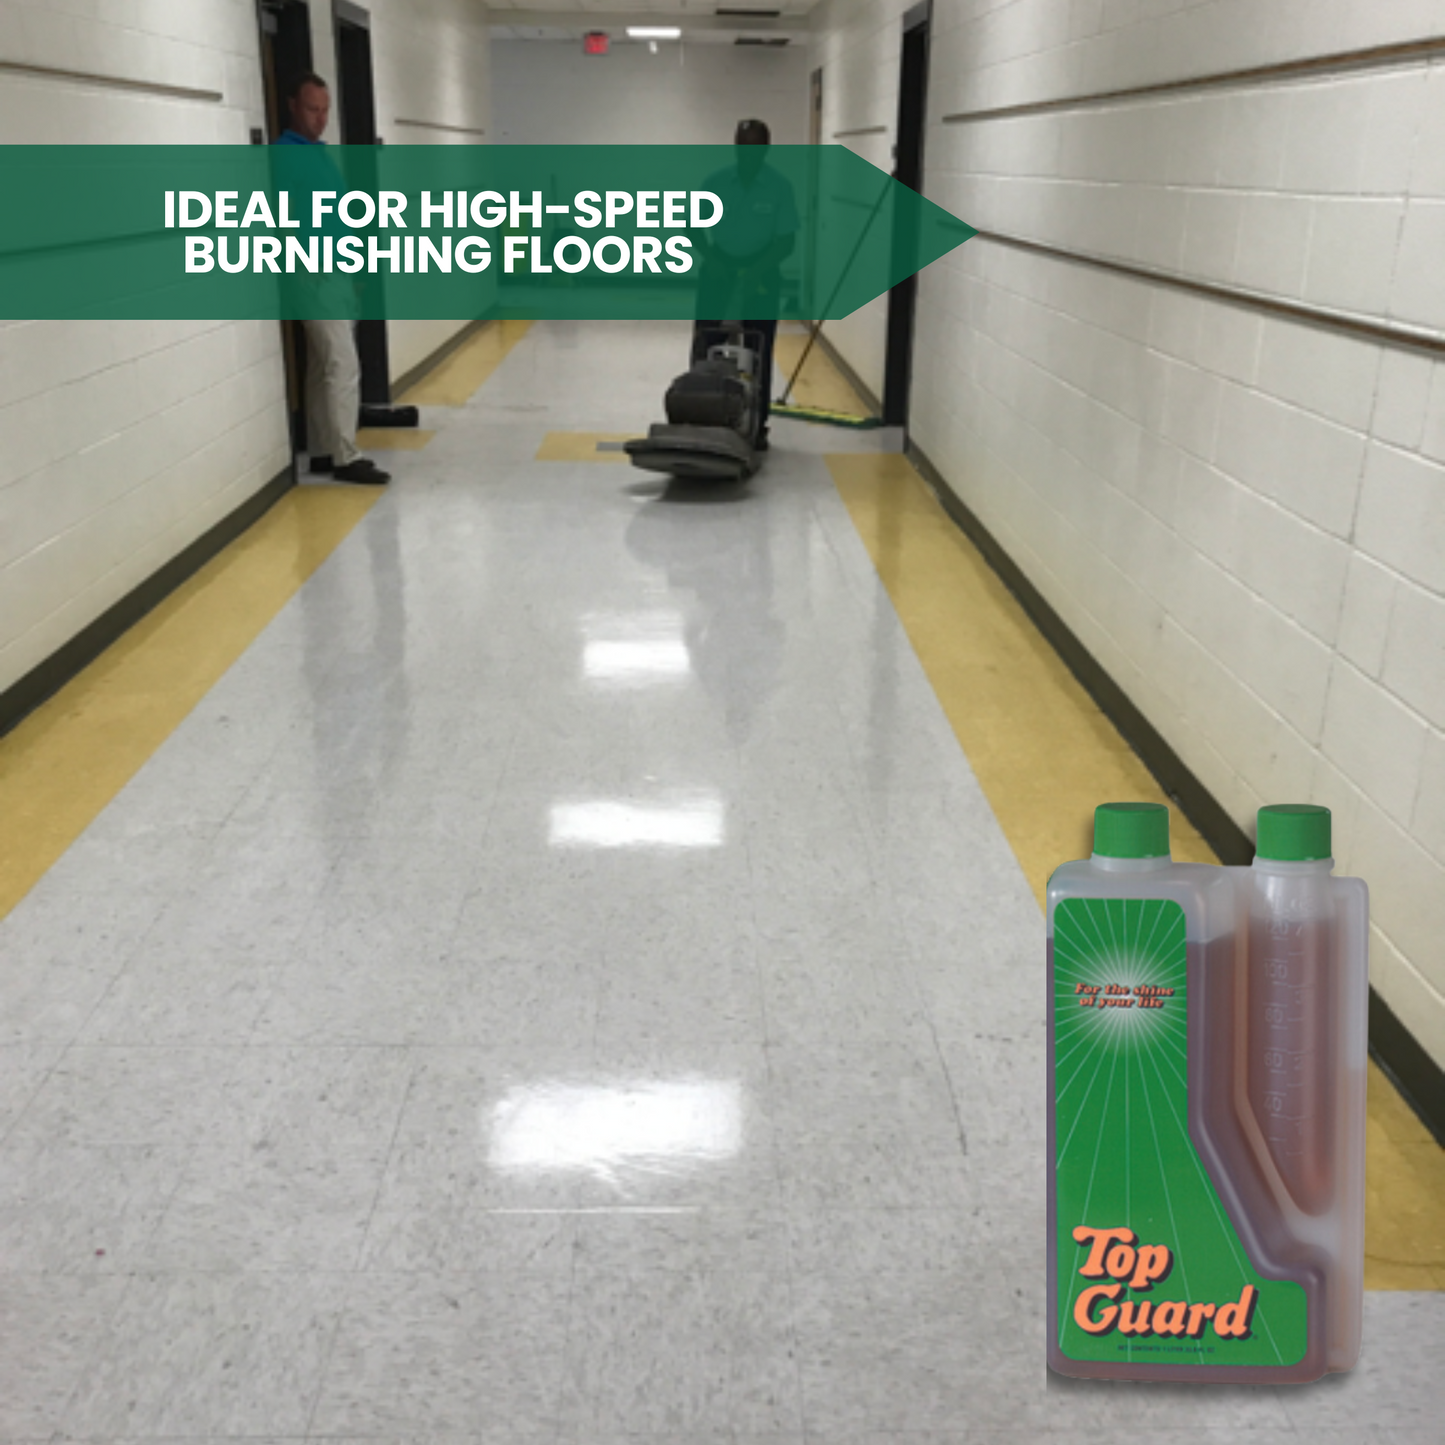 TOP GUARD - Commercial & Industrial Floor Protection, Surface Shield, Creates a Lustrous Wet Look Shine Floor Finish (6x1 Litter Box)